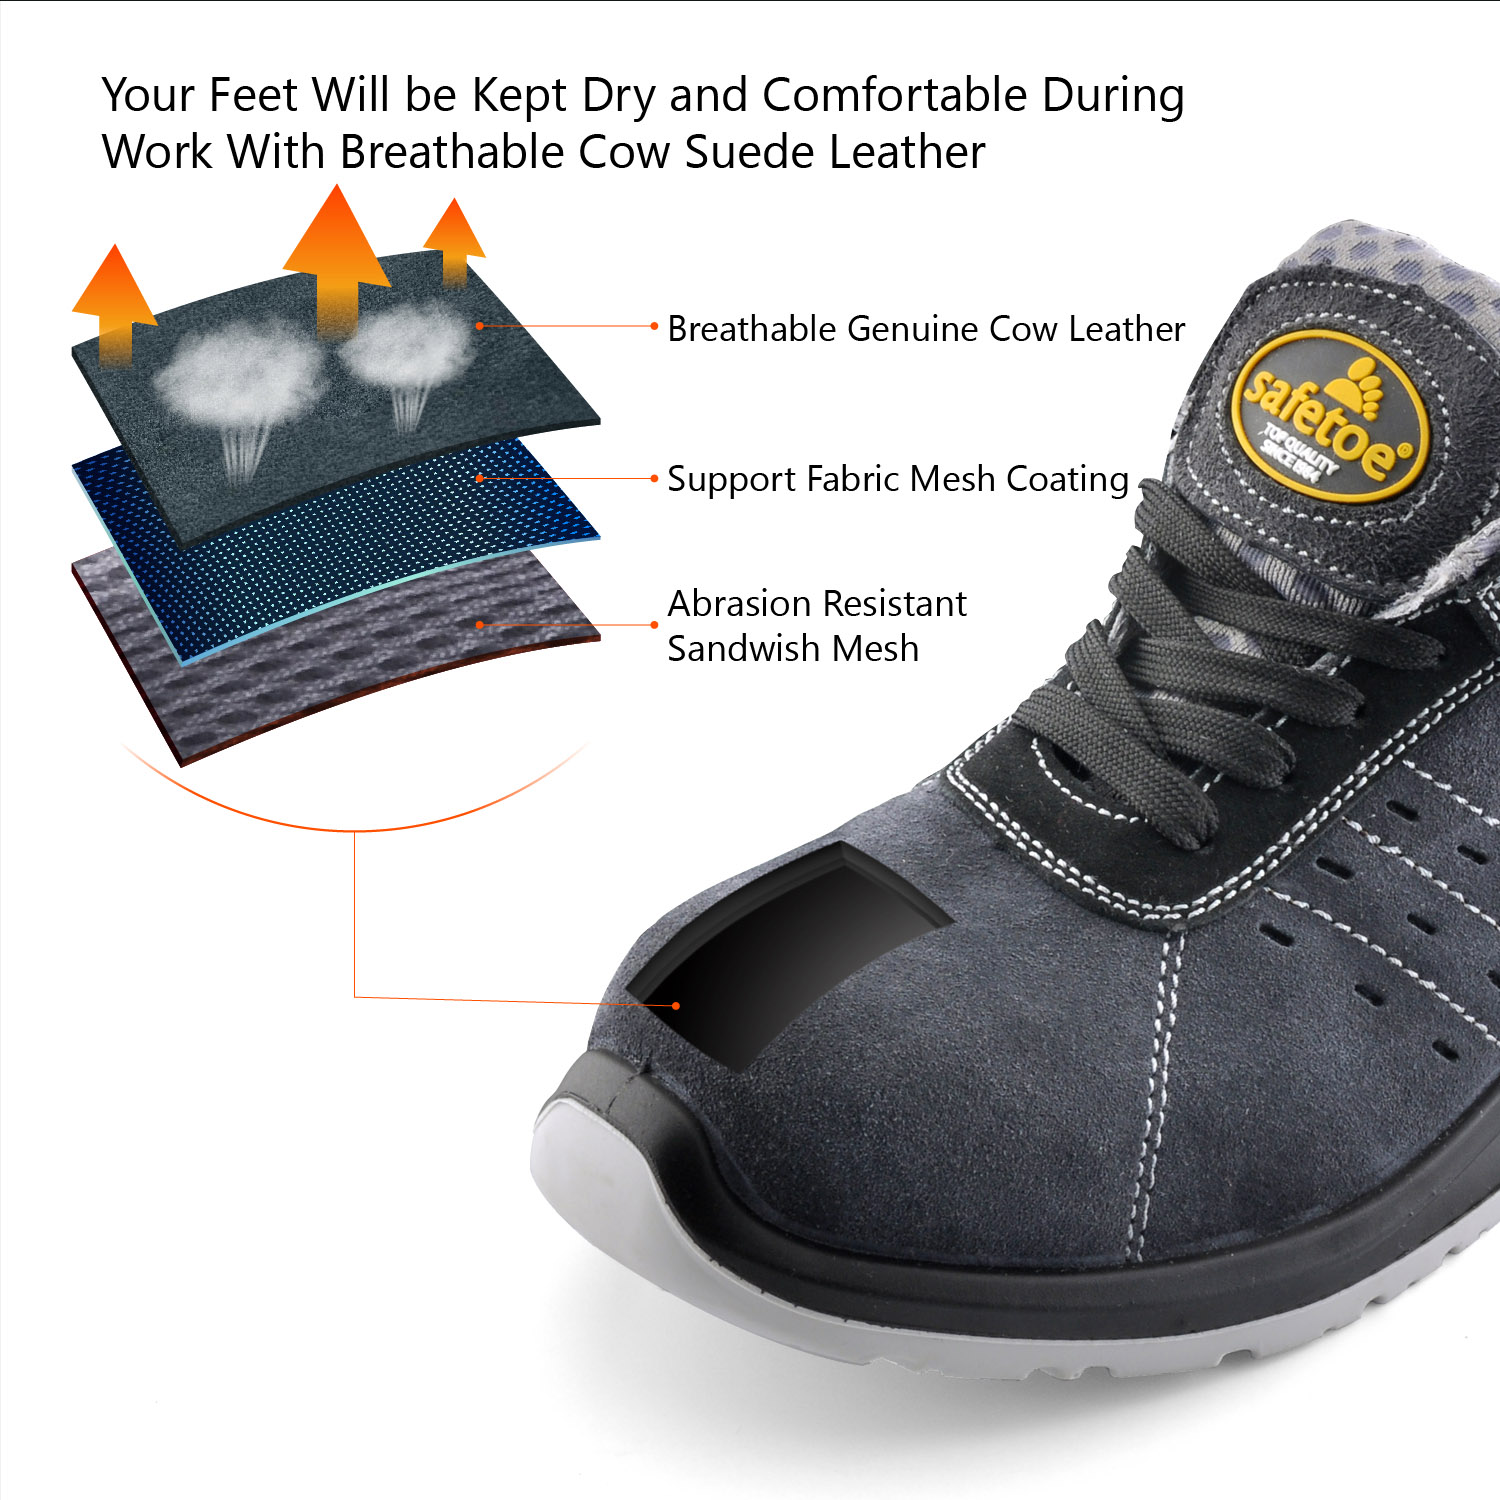 Safetoe Breathable & Lightweight Safety Work Shoes for Men & Women